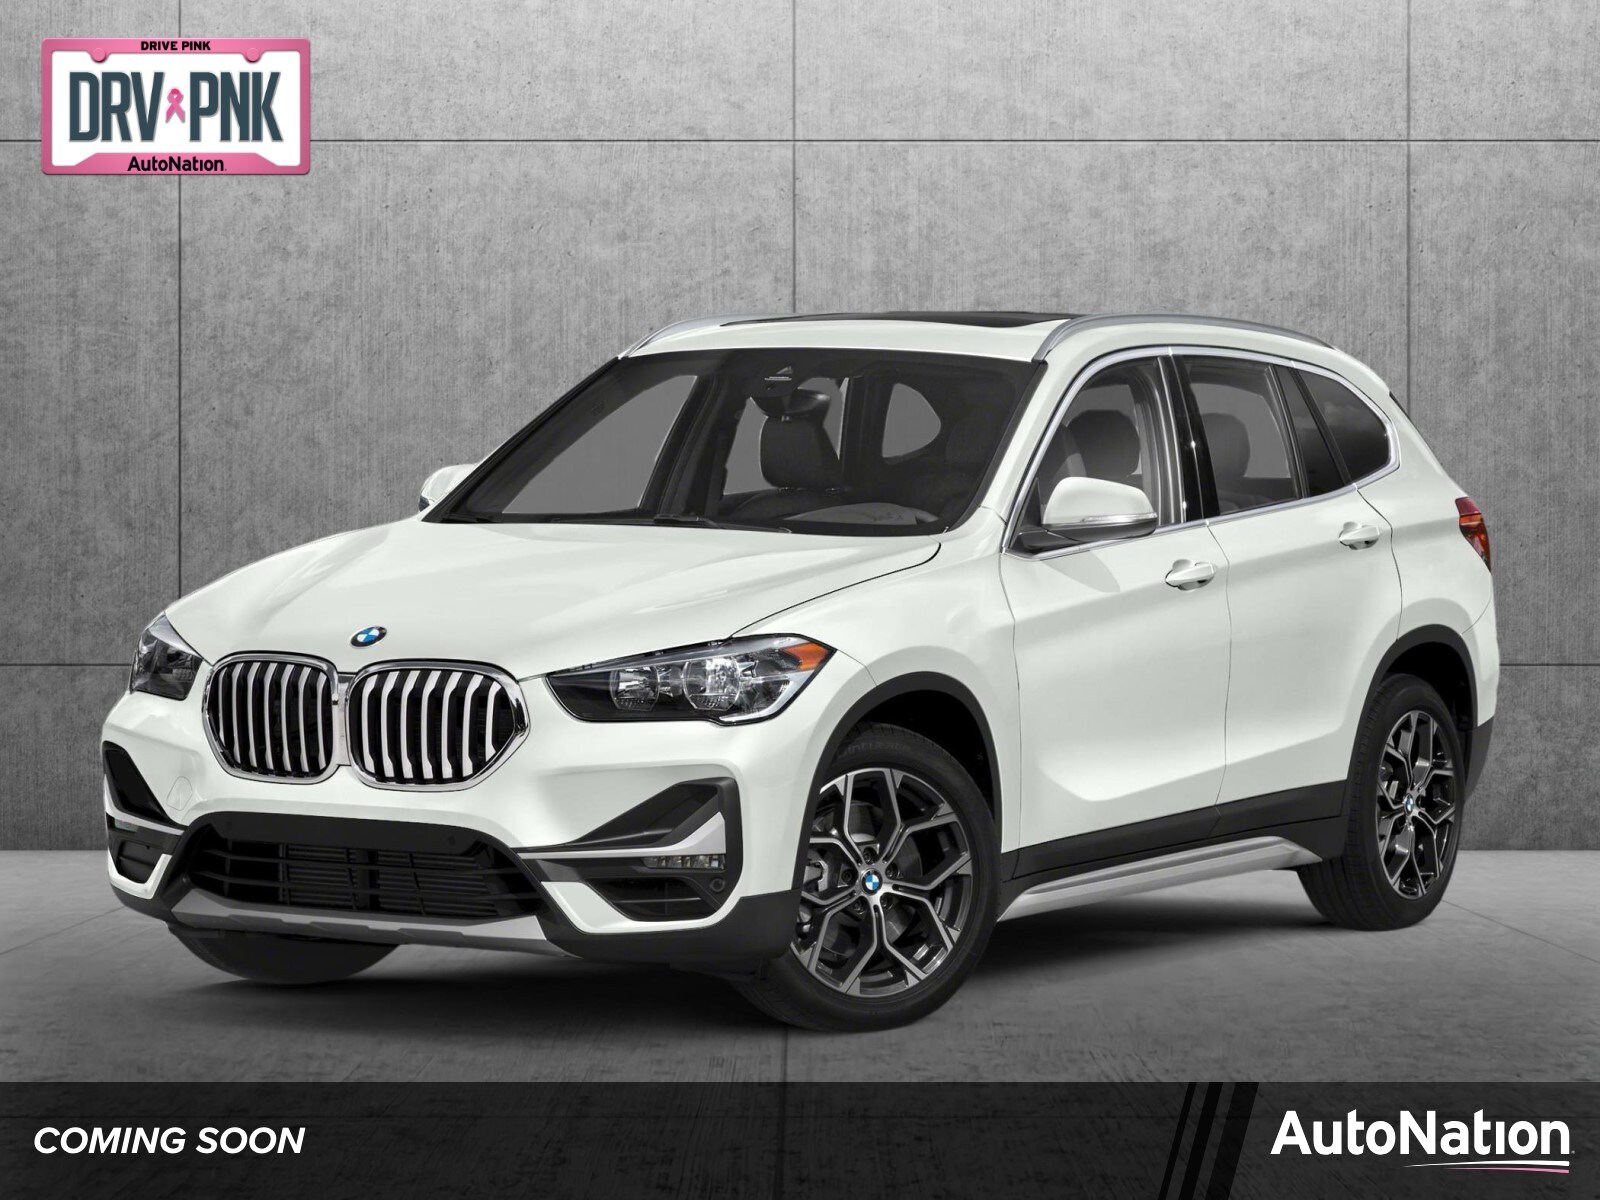 New BMW For Sale in Westmont, IL | AutoNation Drive